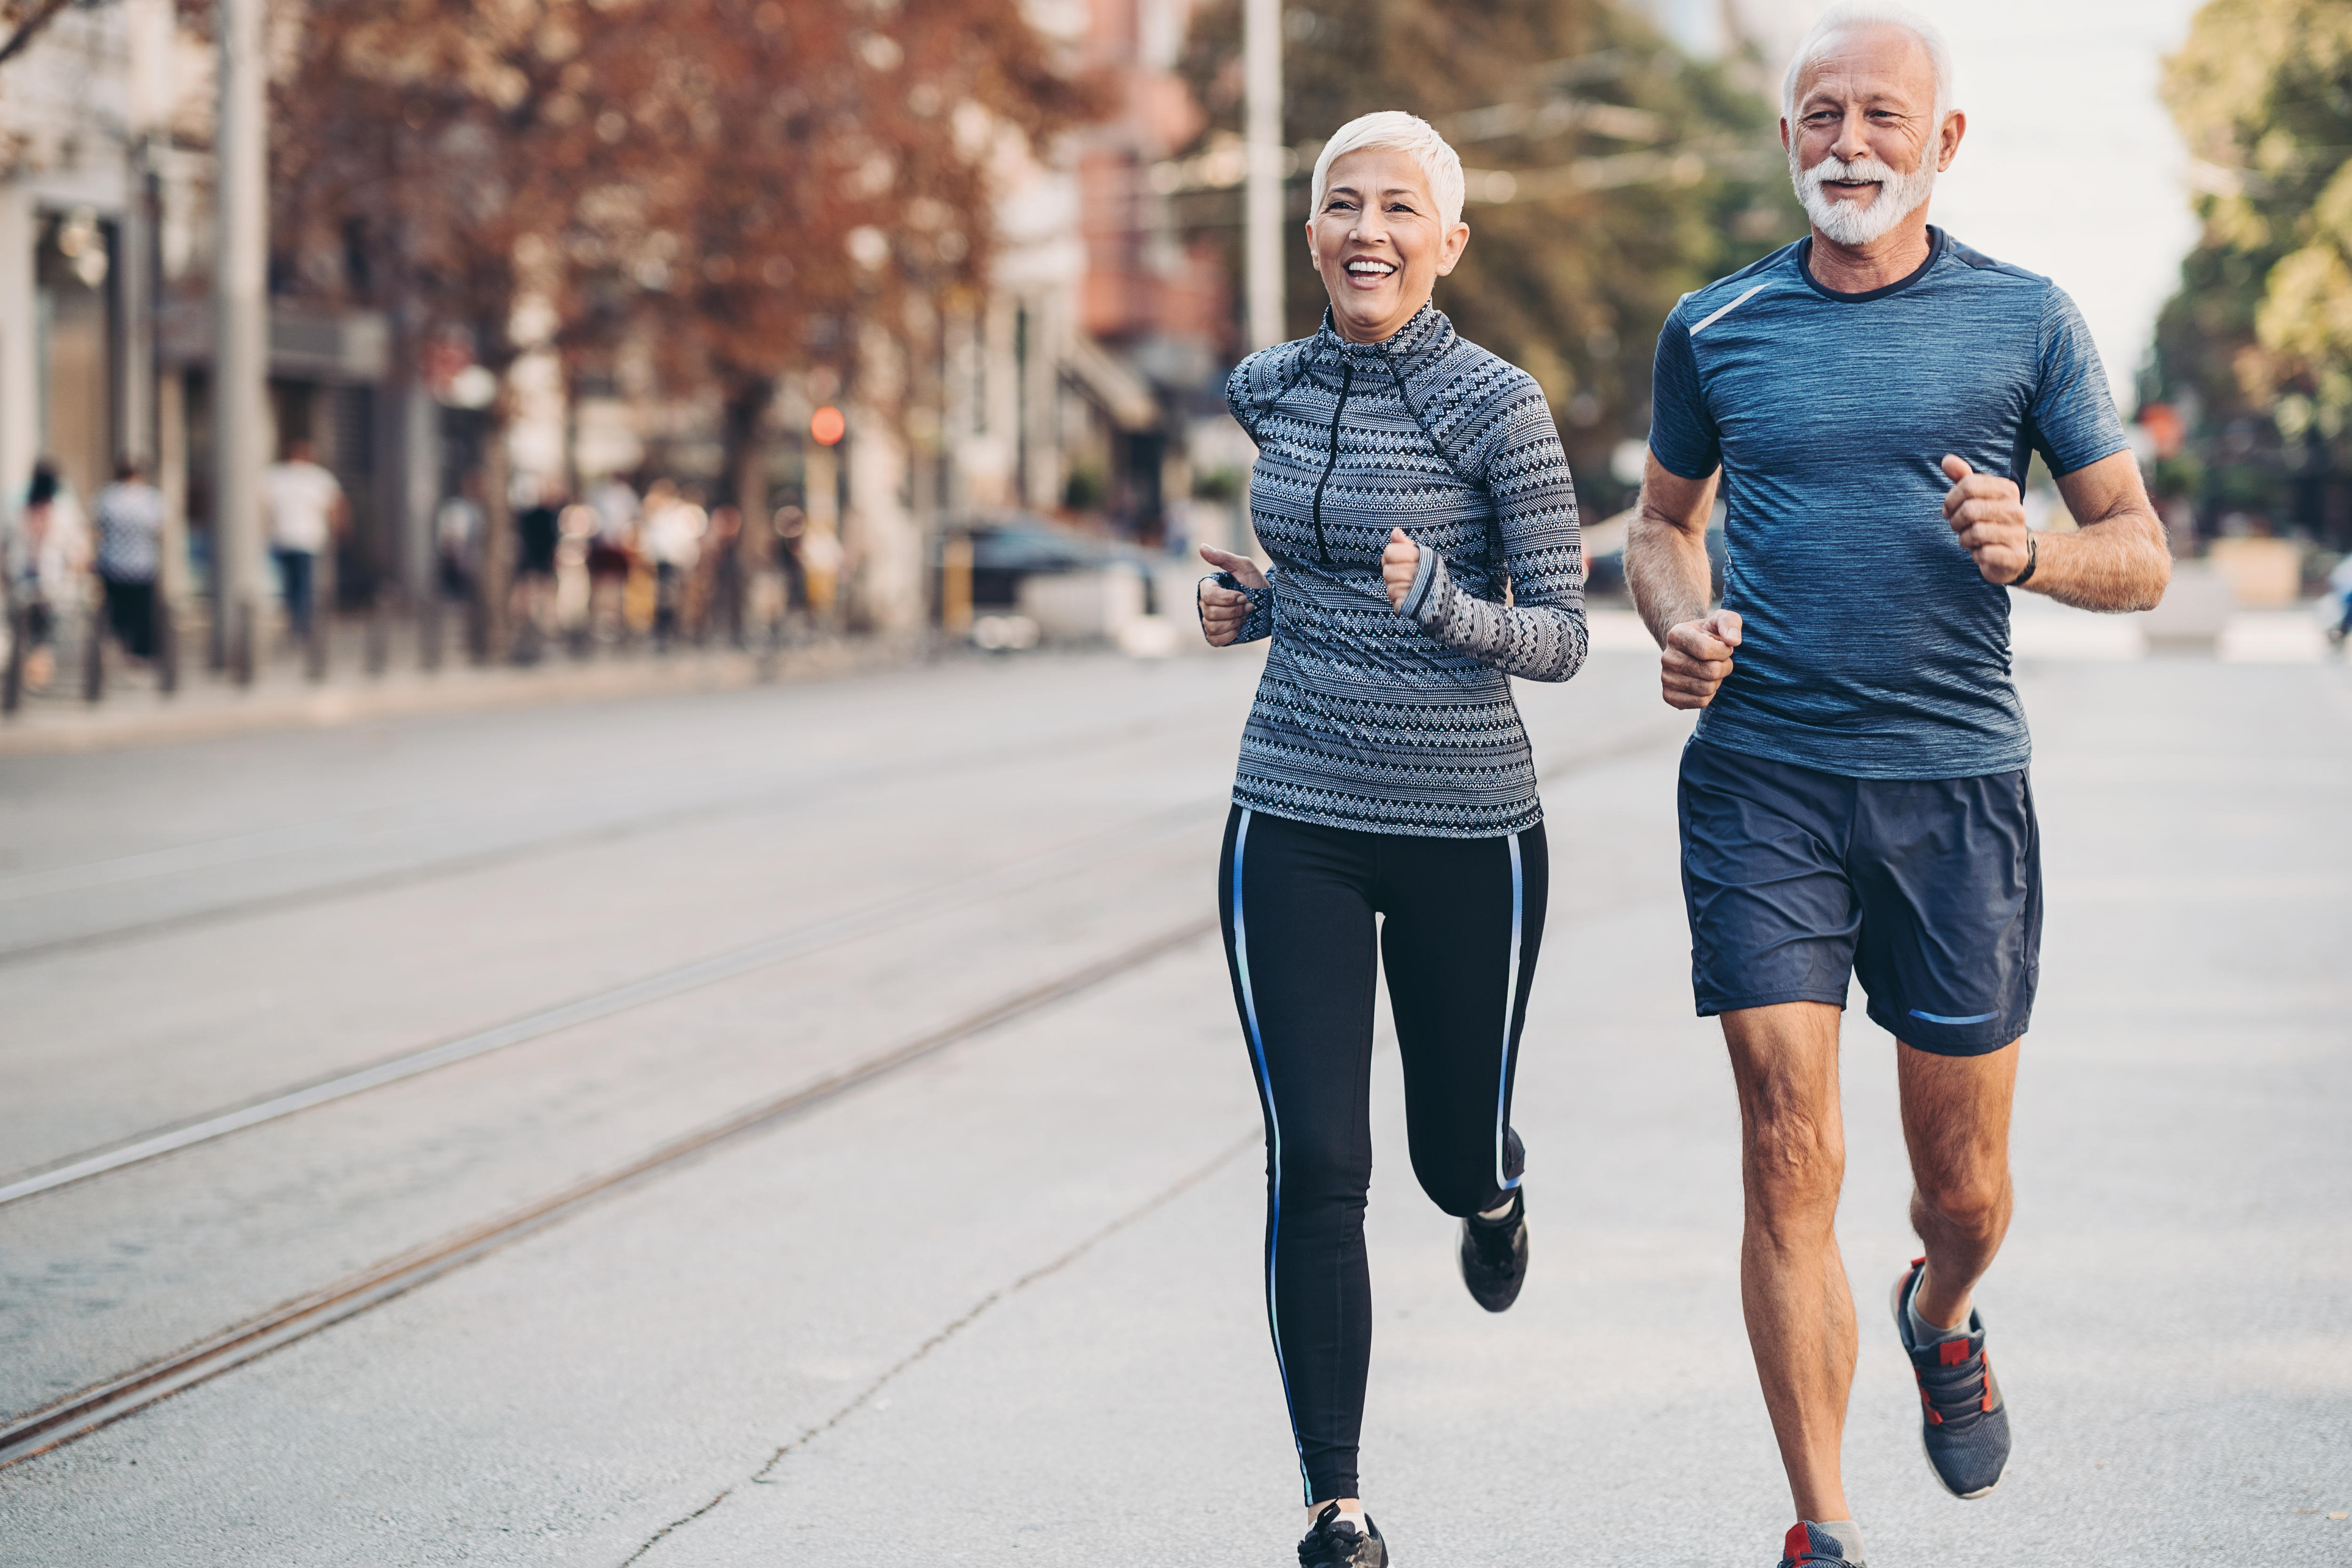 Older woman and man jogging in the street